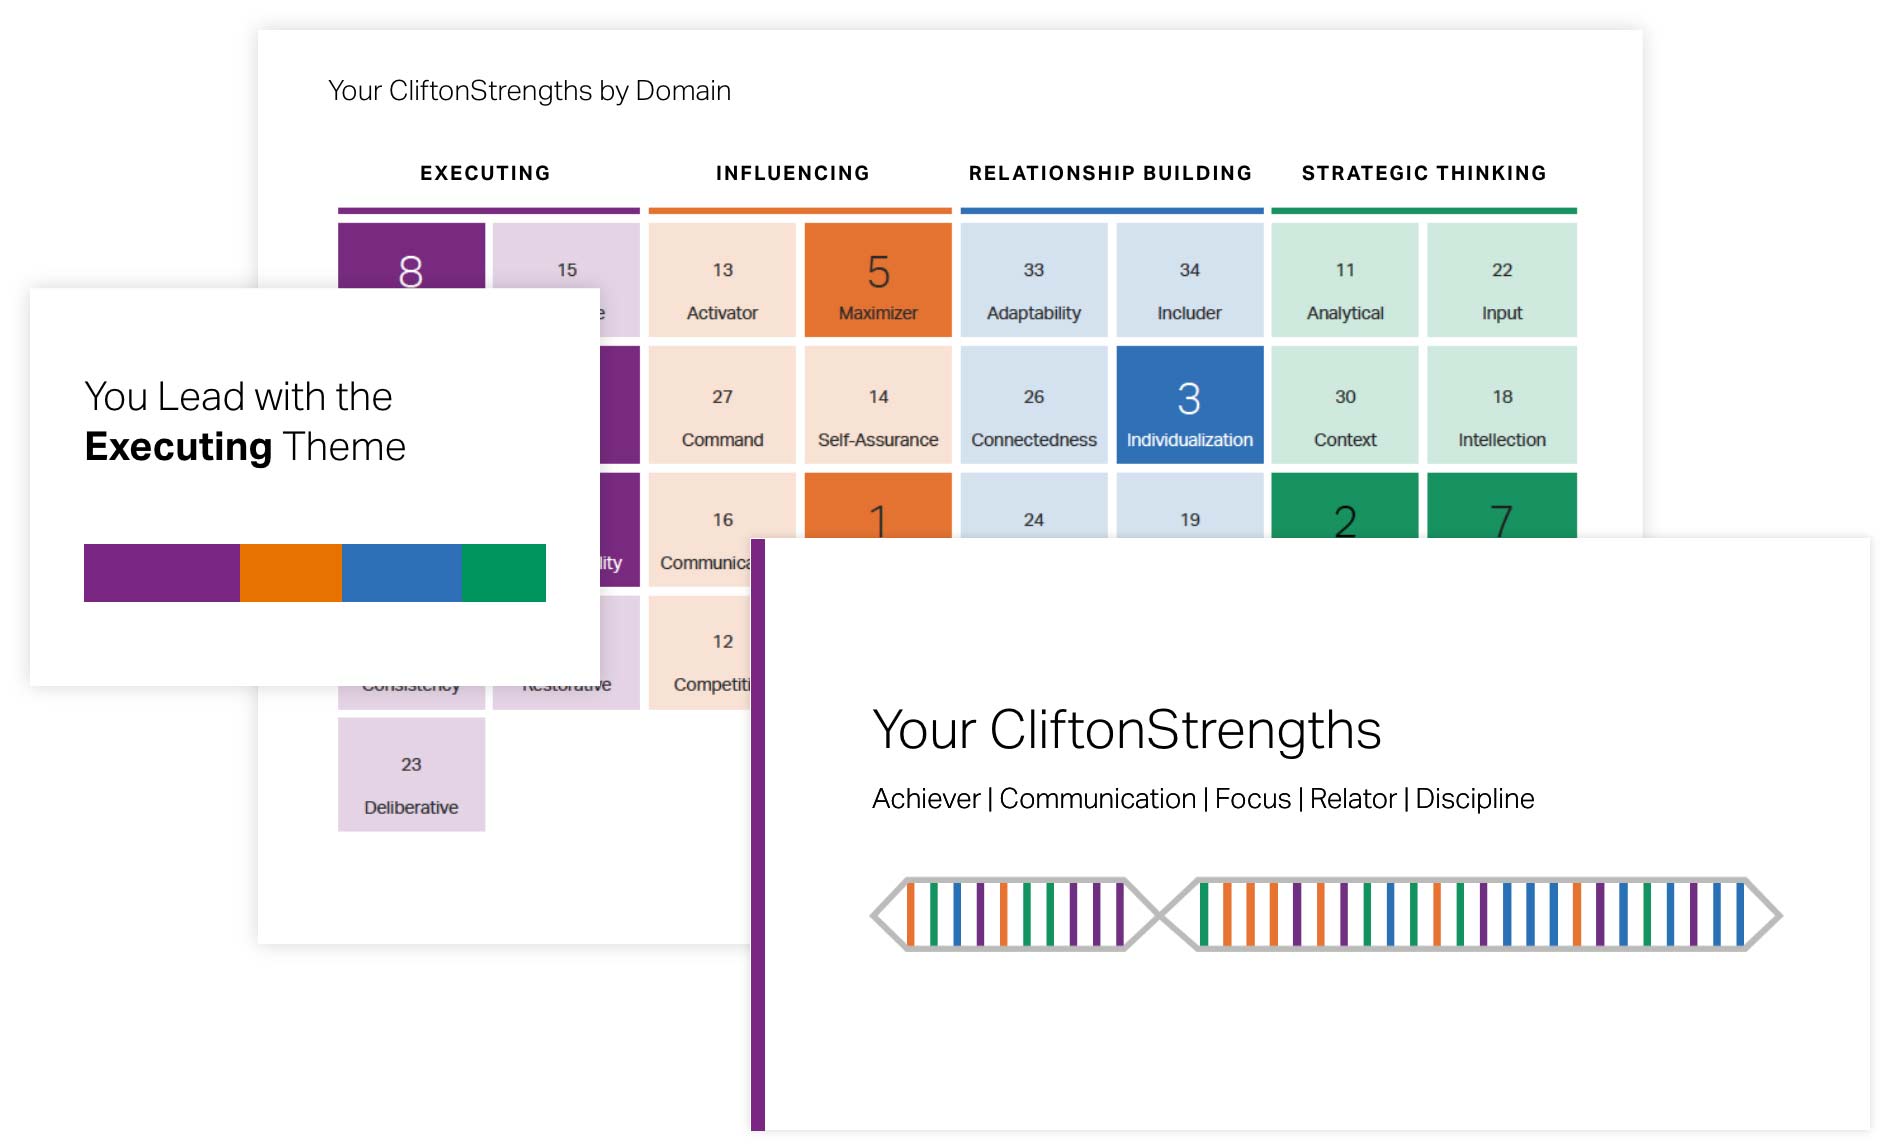 CliftonStrengths by Domain